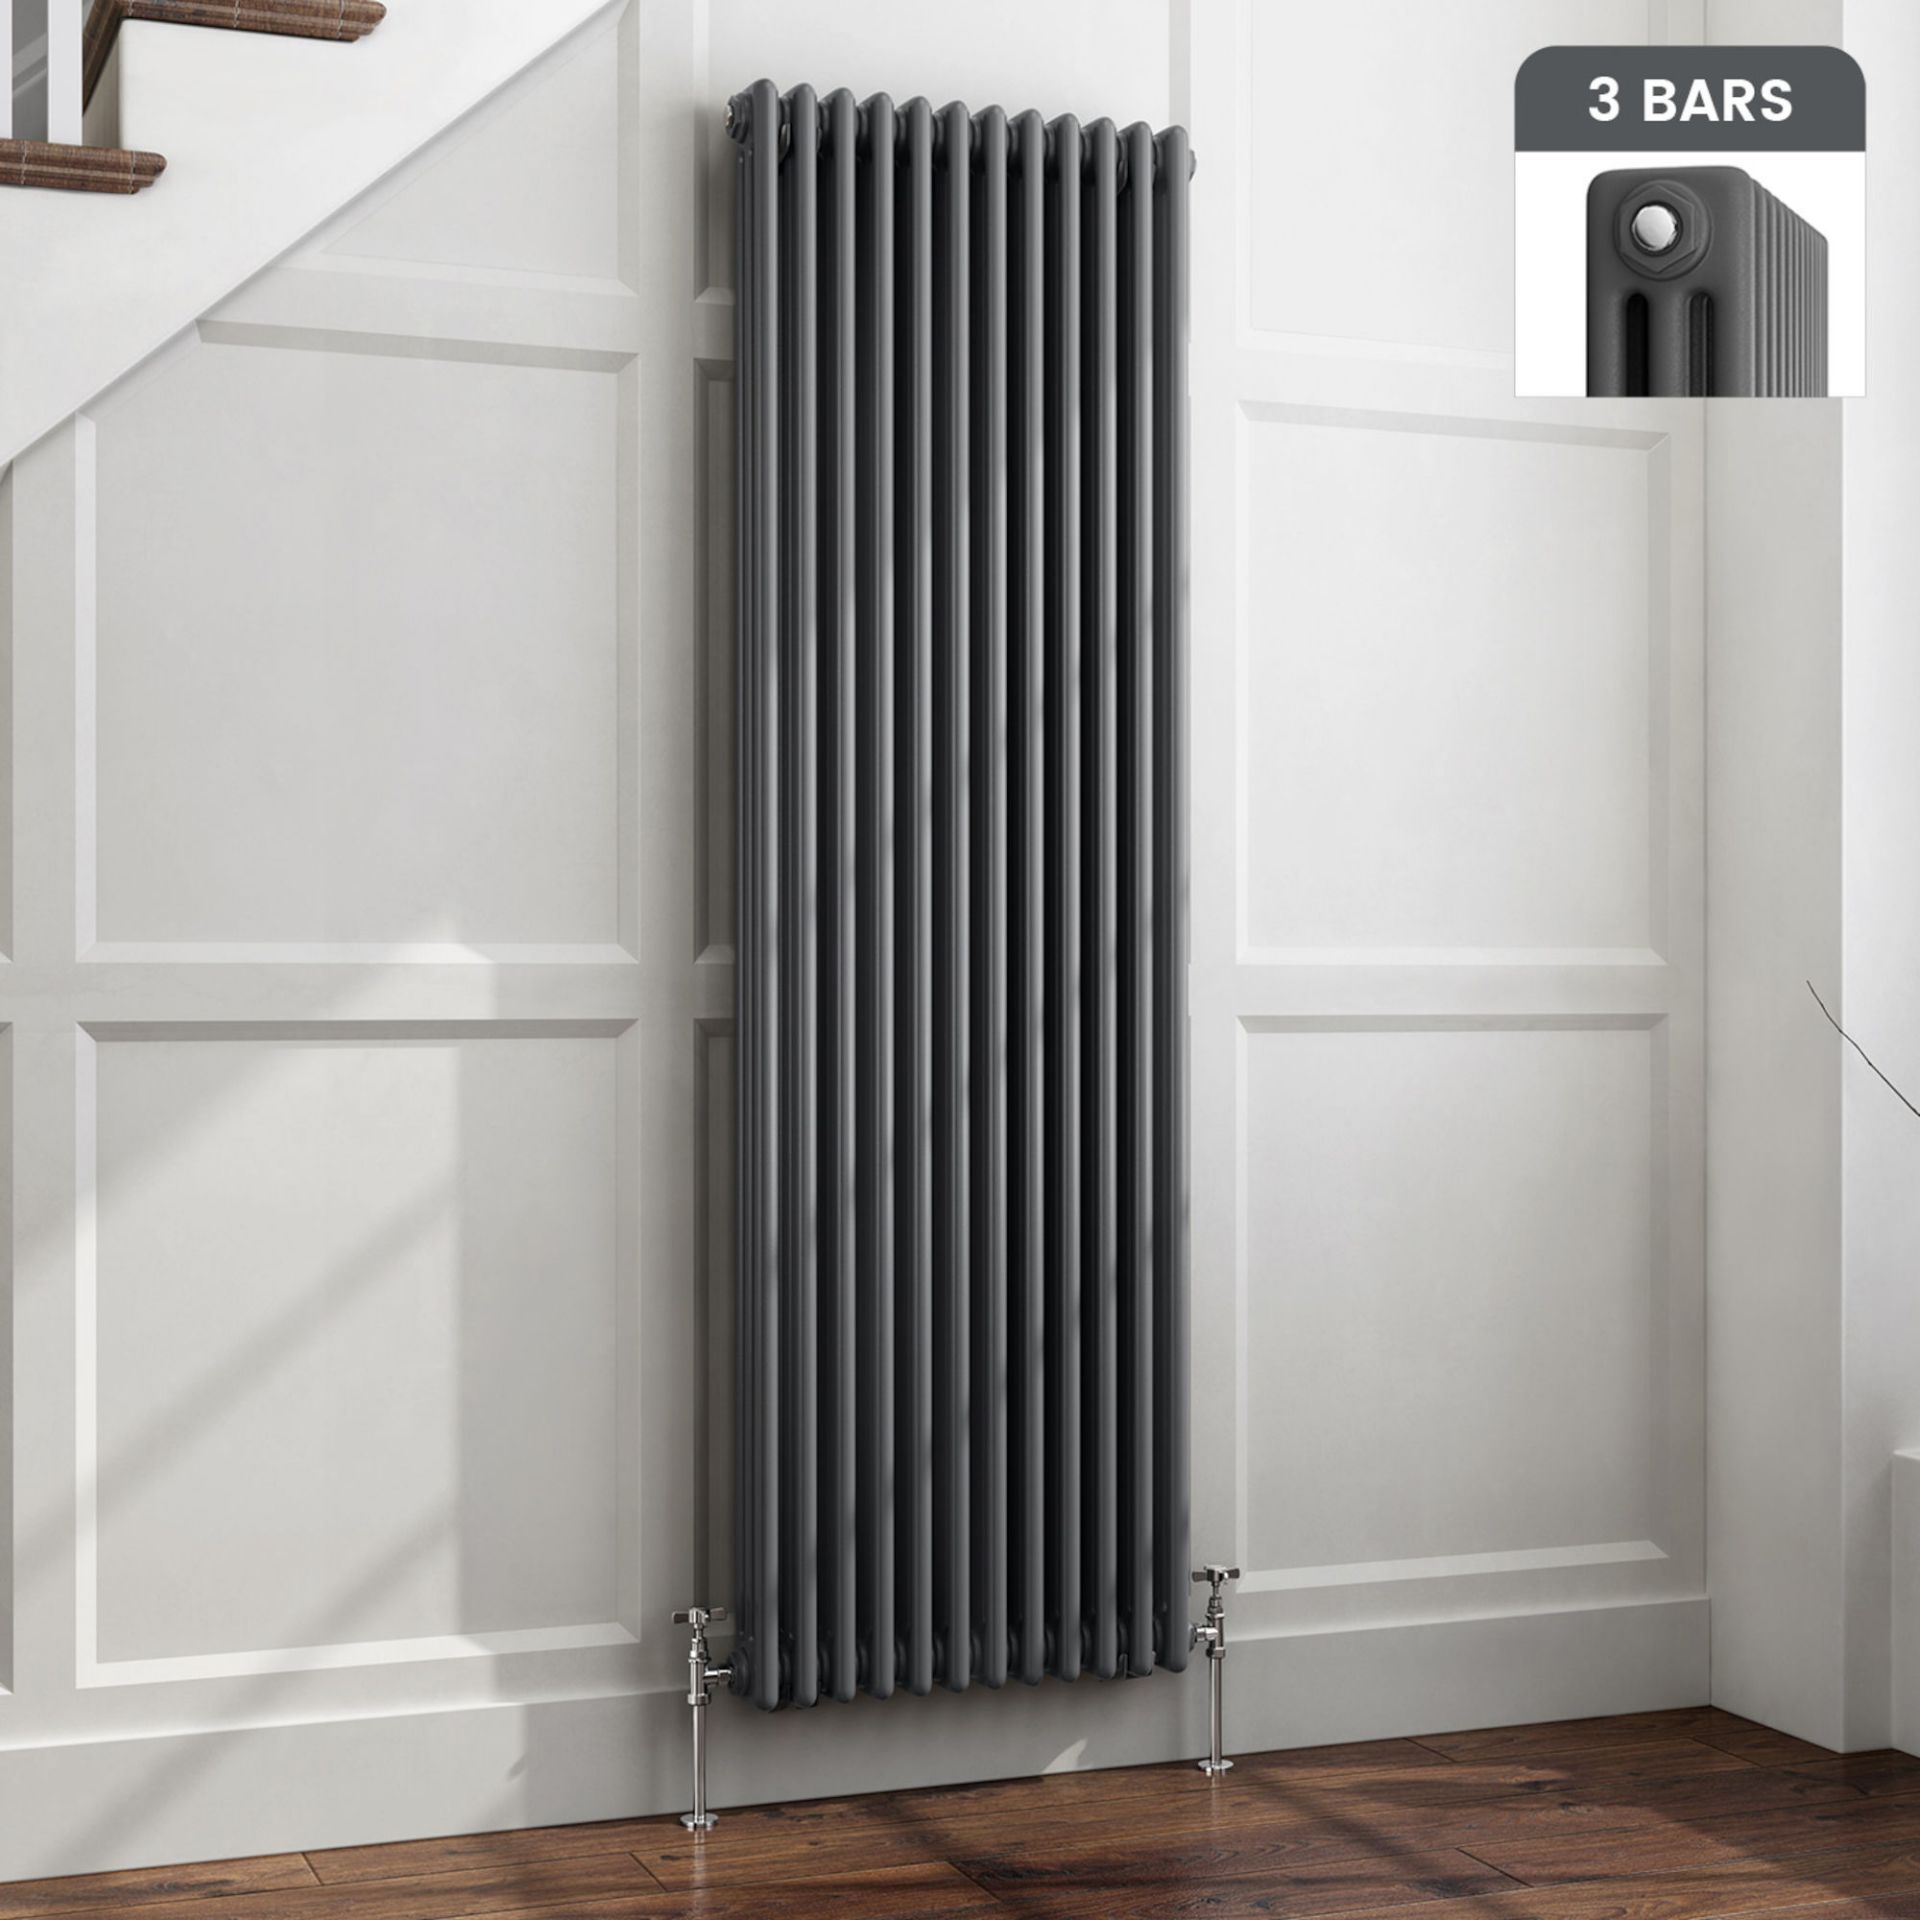 (XM33) 1800x600mm Anthracite Triple Panel Vertical Colosseum Traditional Radiator. RRP £539.99. Made